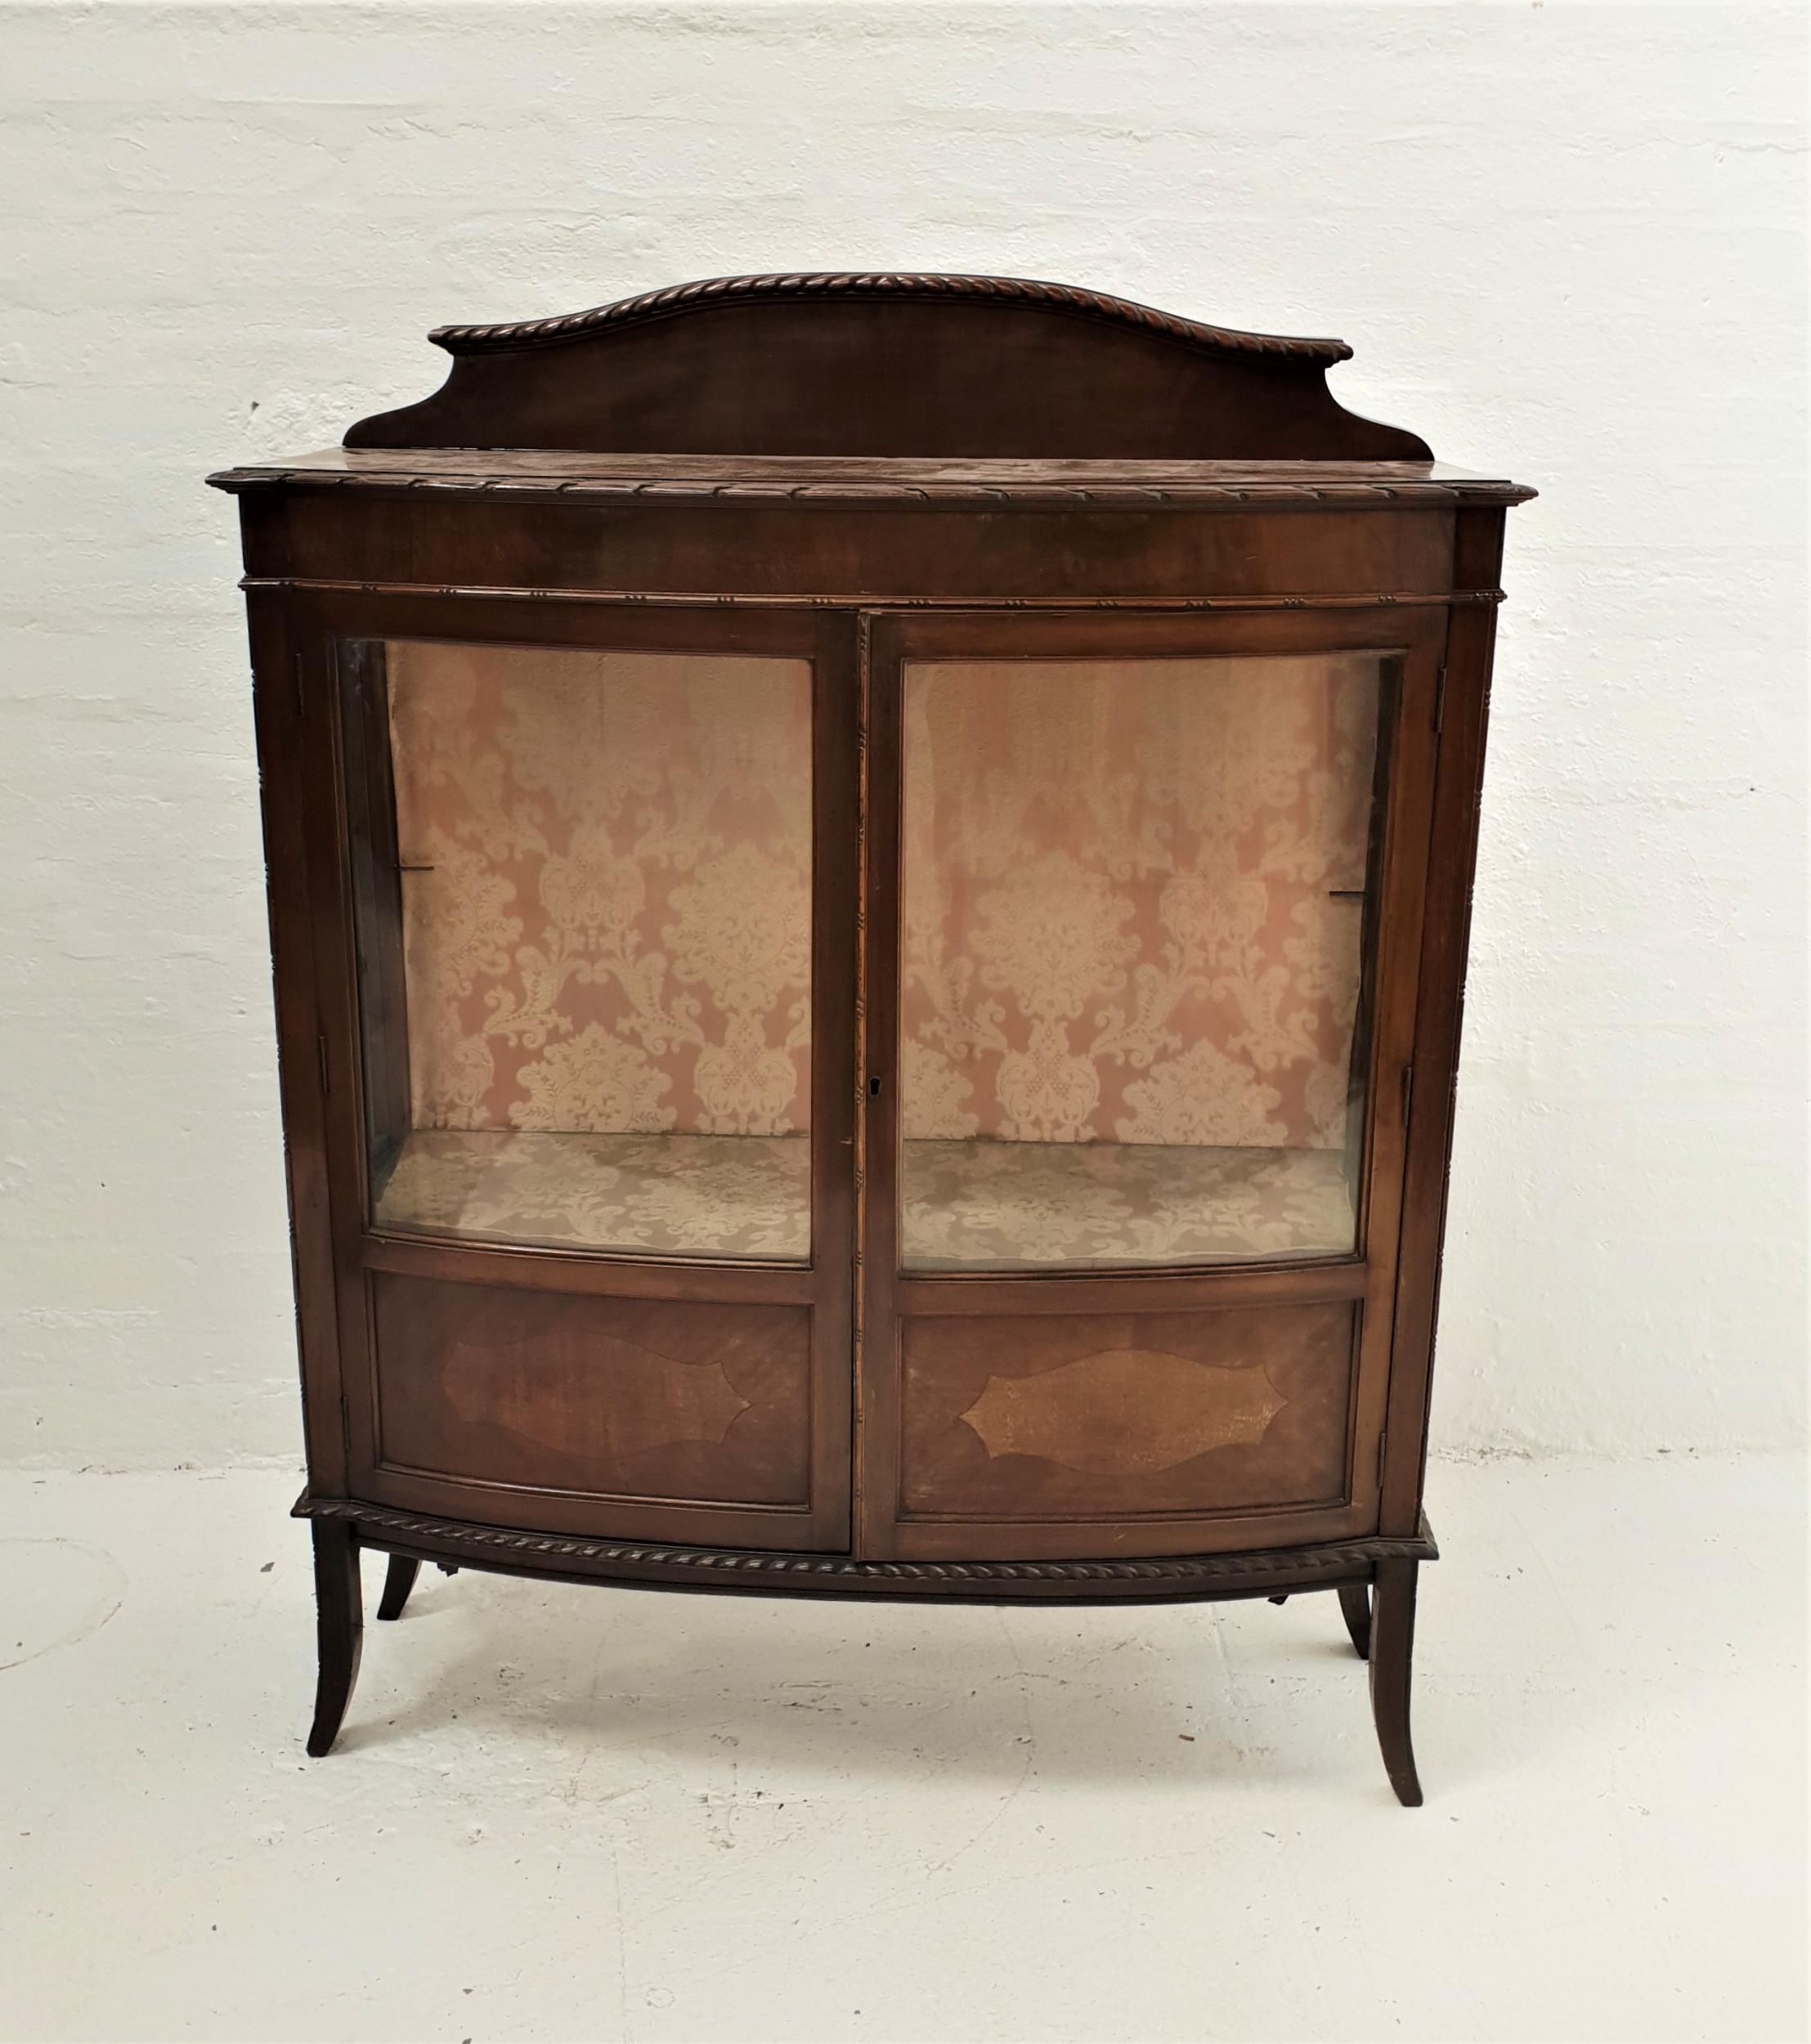 BOW FRONT MAHOGANY DISPLAY CABINET with a shaped raised back above a moulded top, the part glazed